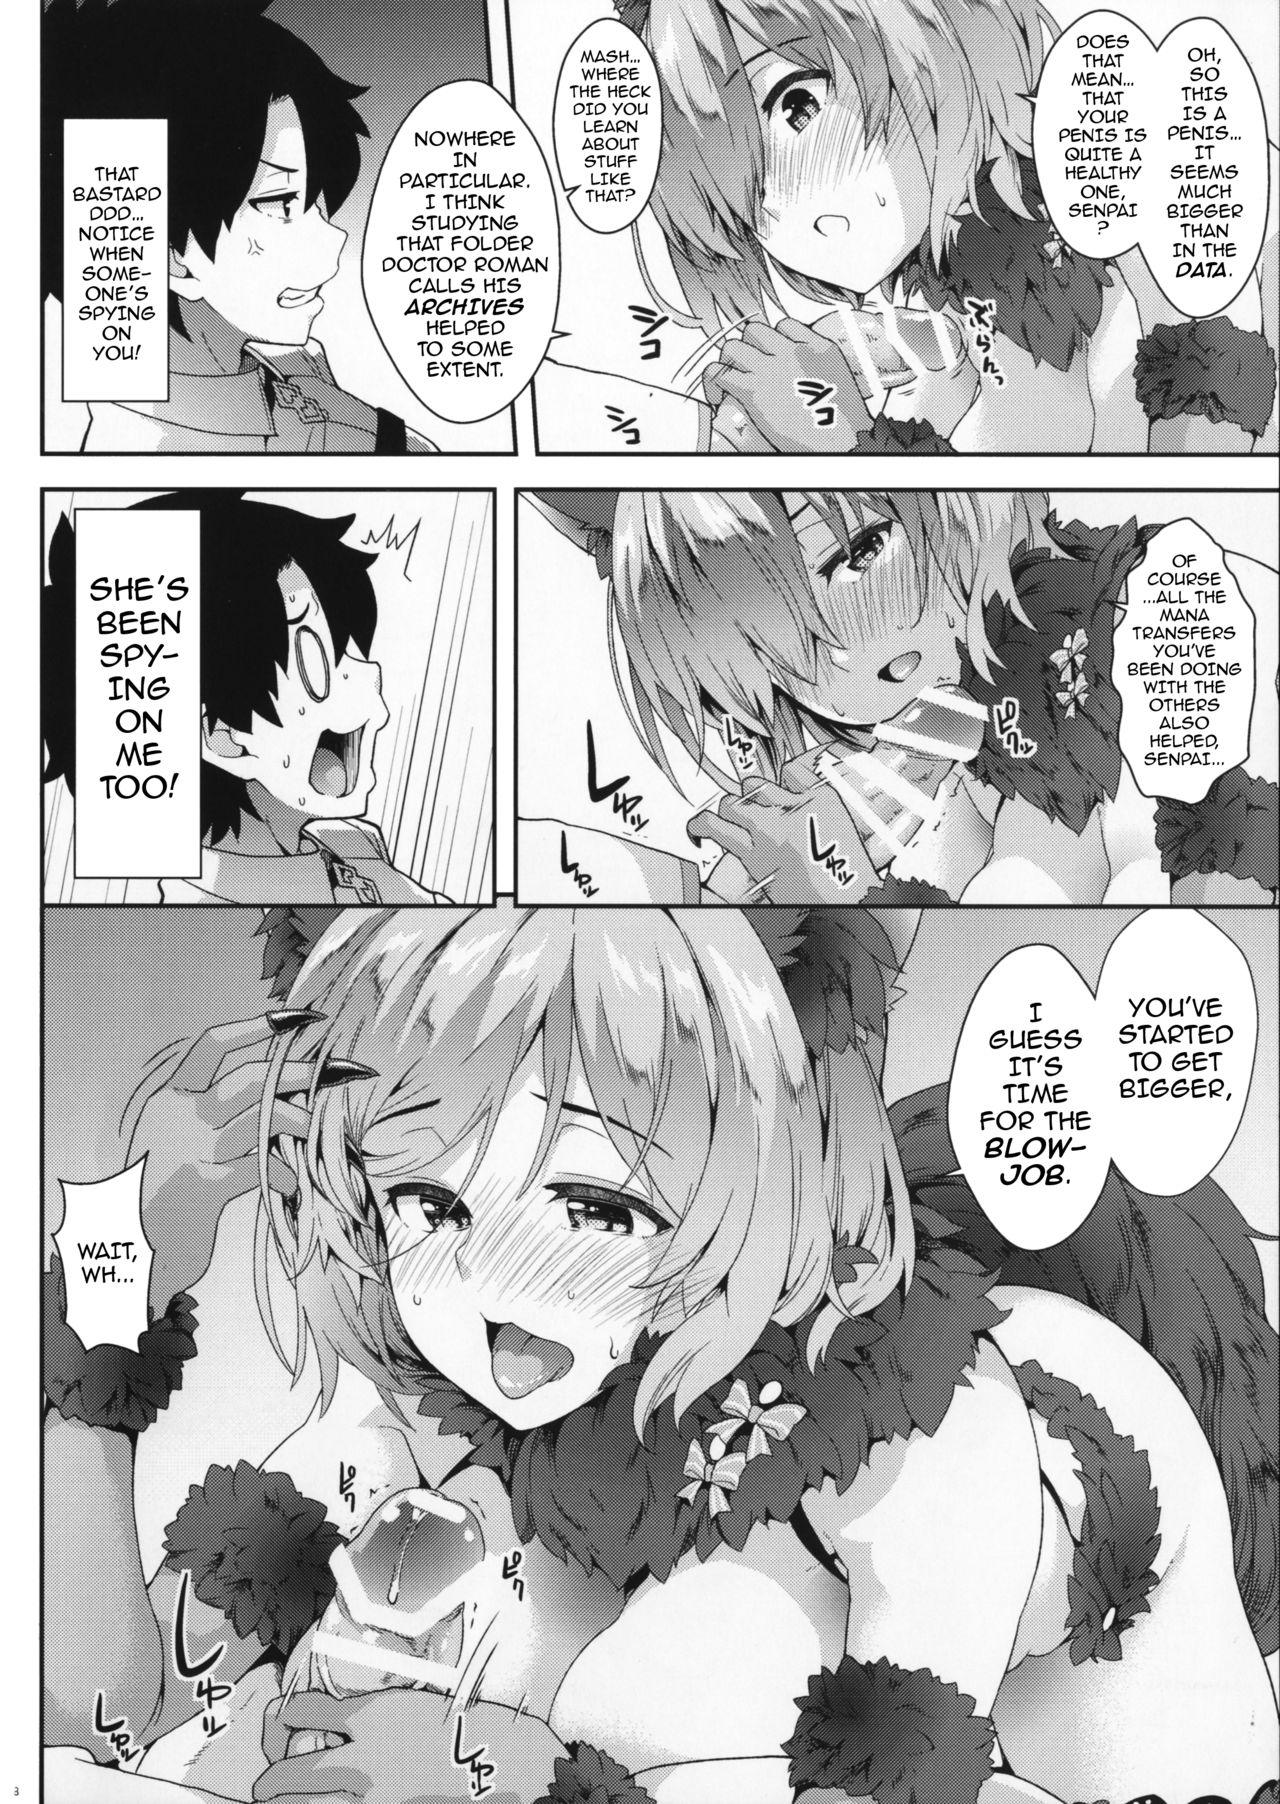 Marido Why am I jealous of you? - Fate grand order Salope - Page 7